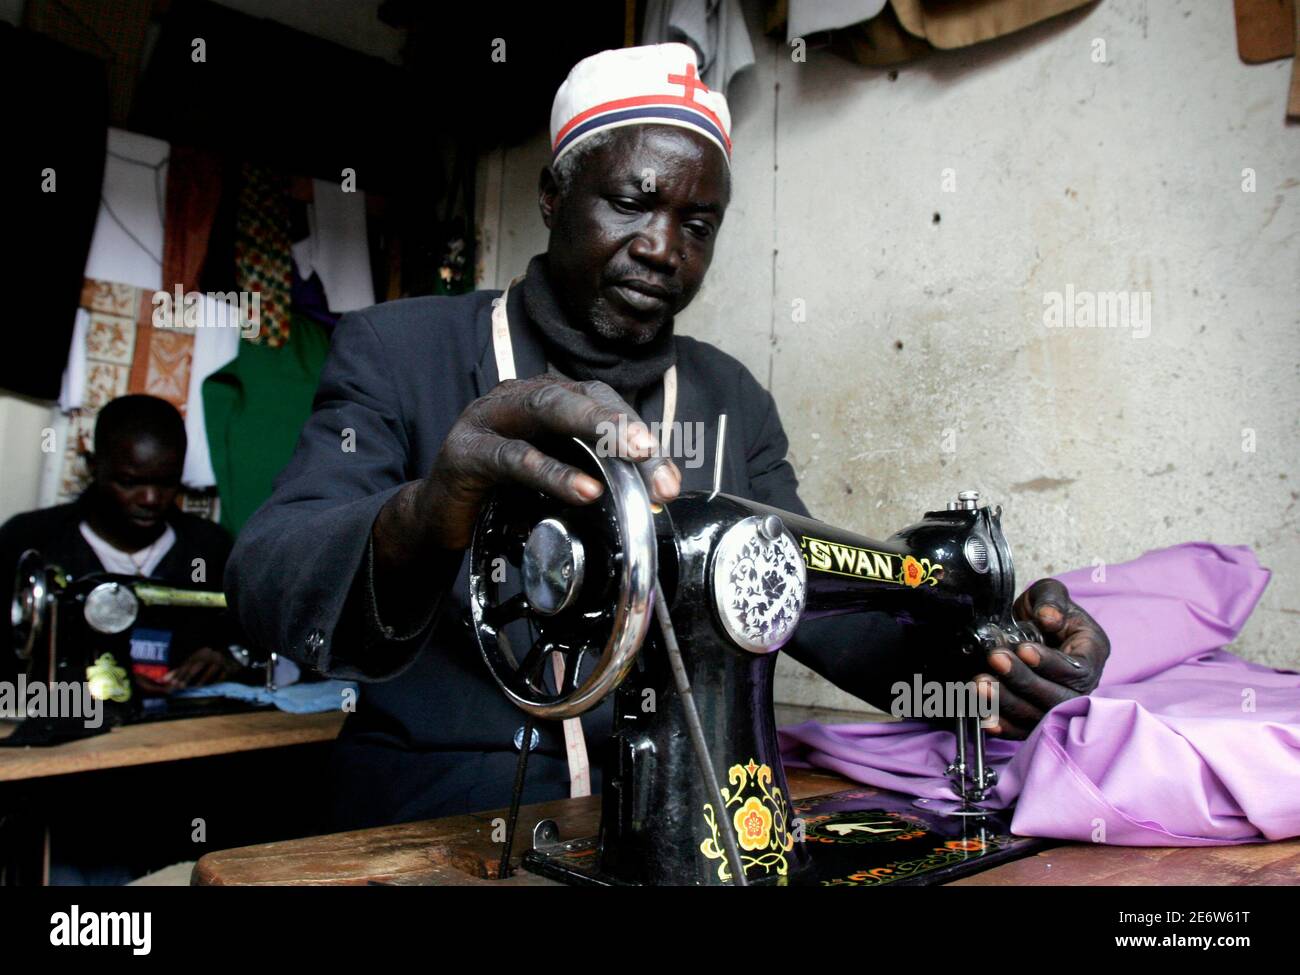 Chrispin Amolo repairs an outfit in Kibera slums, home to more than 800,000 people in Kenya's capital Nairobi, December 6, 2006. The world's slum population is set to grow by 27 million per year between 2000-2020, according to the U.N. Human Settlements Programme U.N.-HABITAT. In sub-Saharan Africa, about 72 percent of the urban population already live in slums, and the annual growth rate is the highest in the world at 4.53 percent. Photo taken December 6, 2006.  To match feature CITIES/KENYA-SLUM  REUTERS/Thomas Mukoya (KENYA) Stock Photo